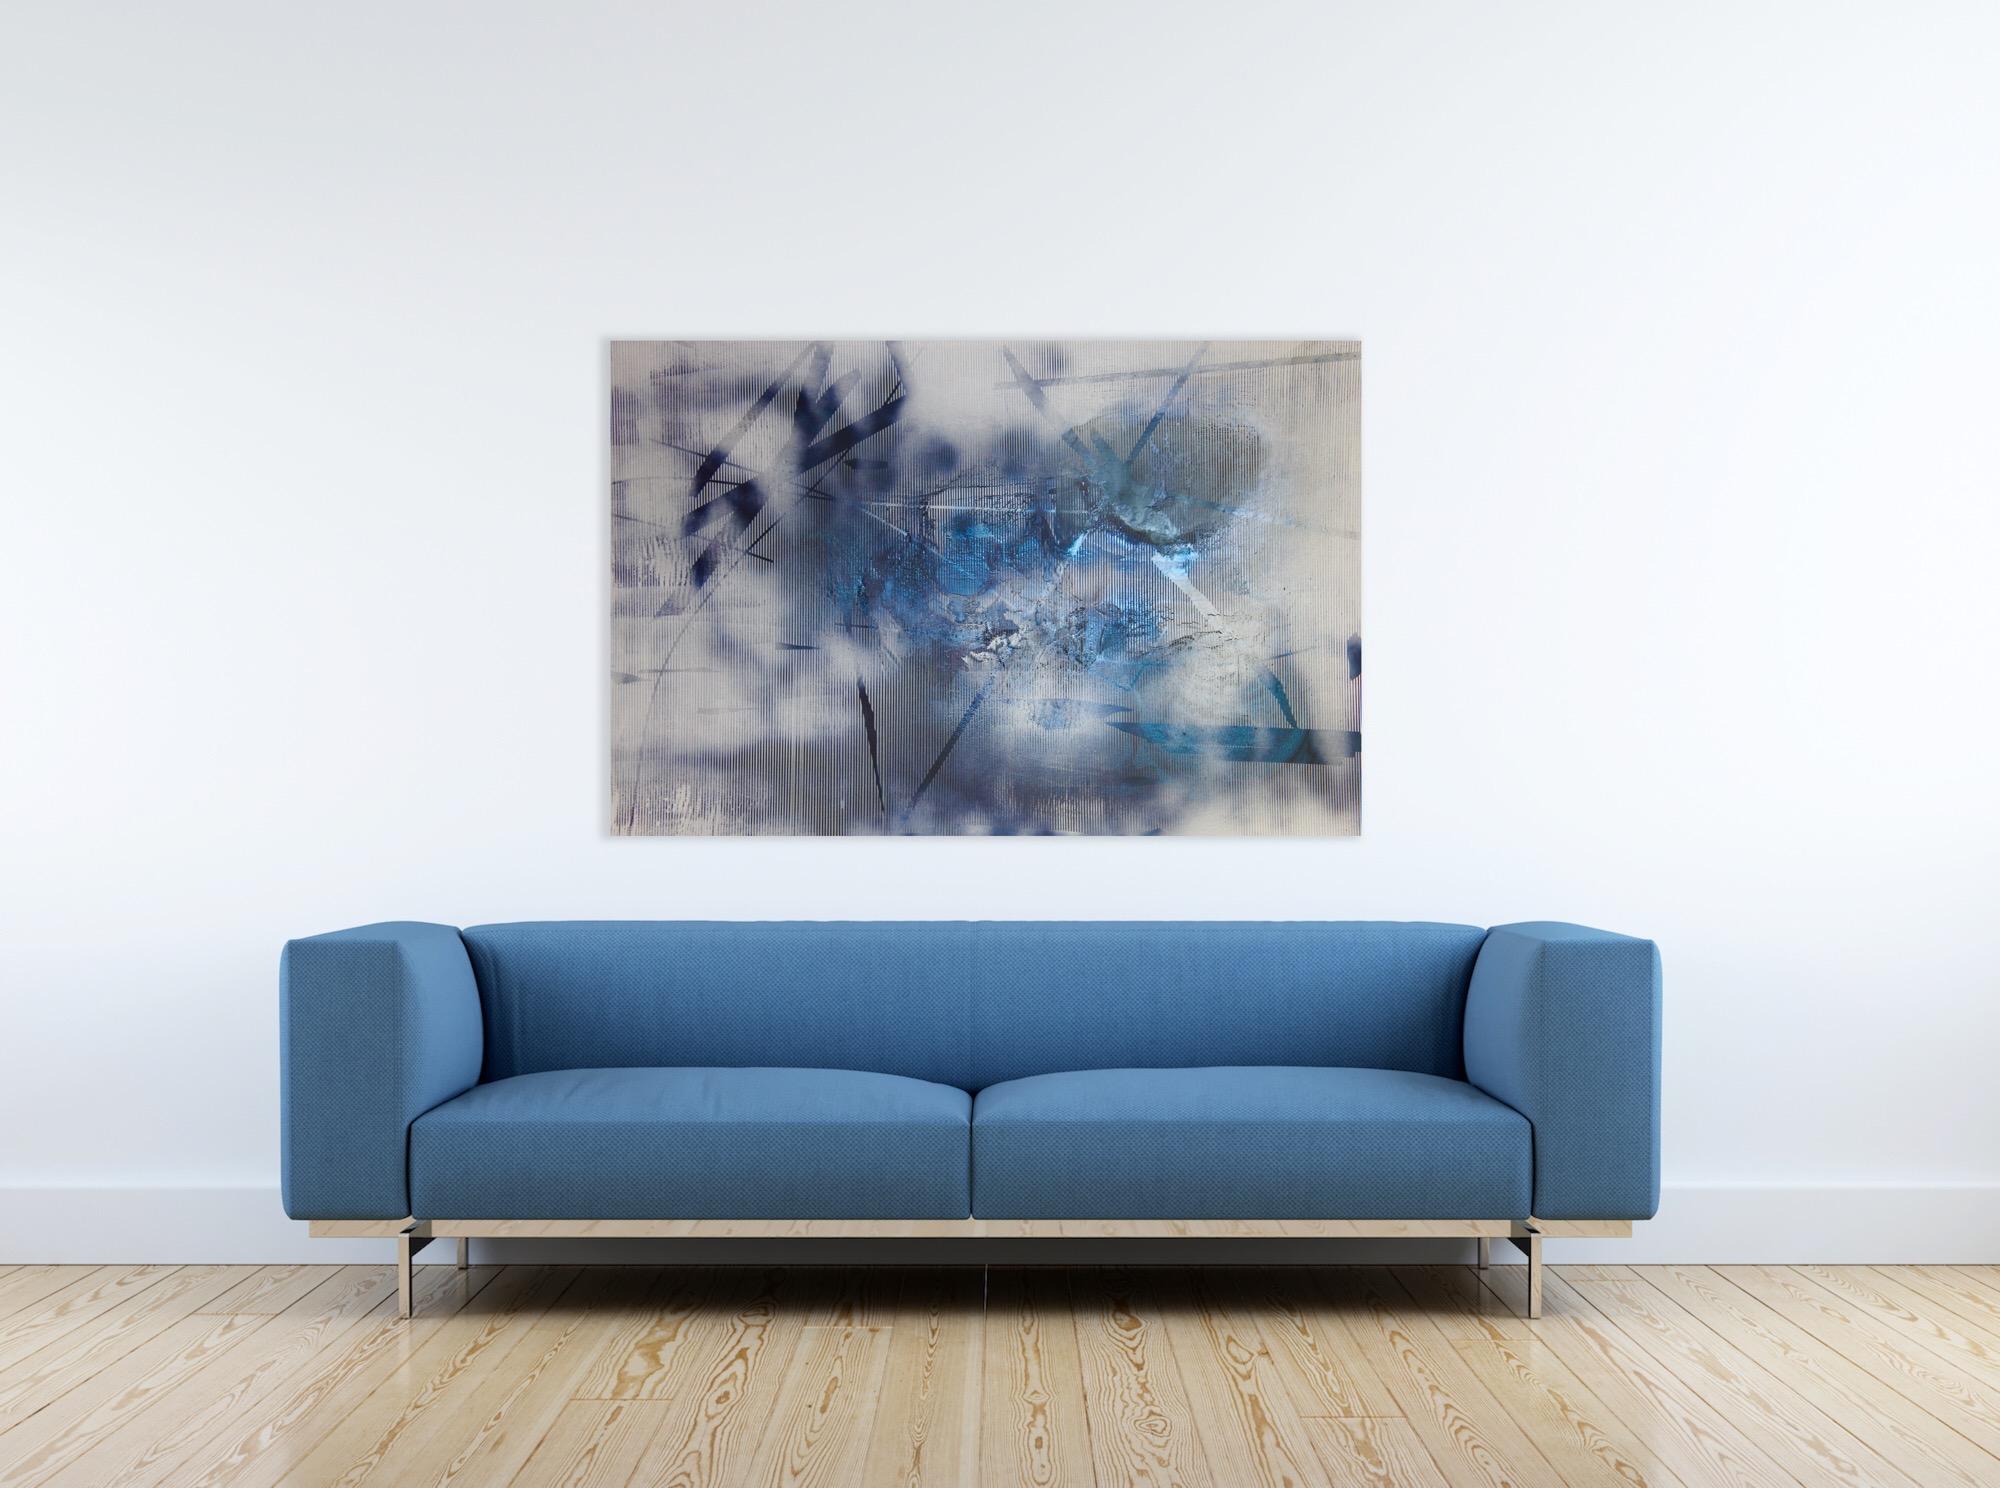 Screen tbd4 (abstract grid painting contemporary blue white atmospheric art) - Abstract Geometric Painting by Melisa Taylor Metzger